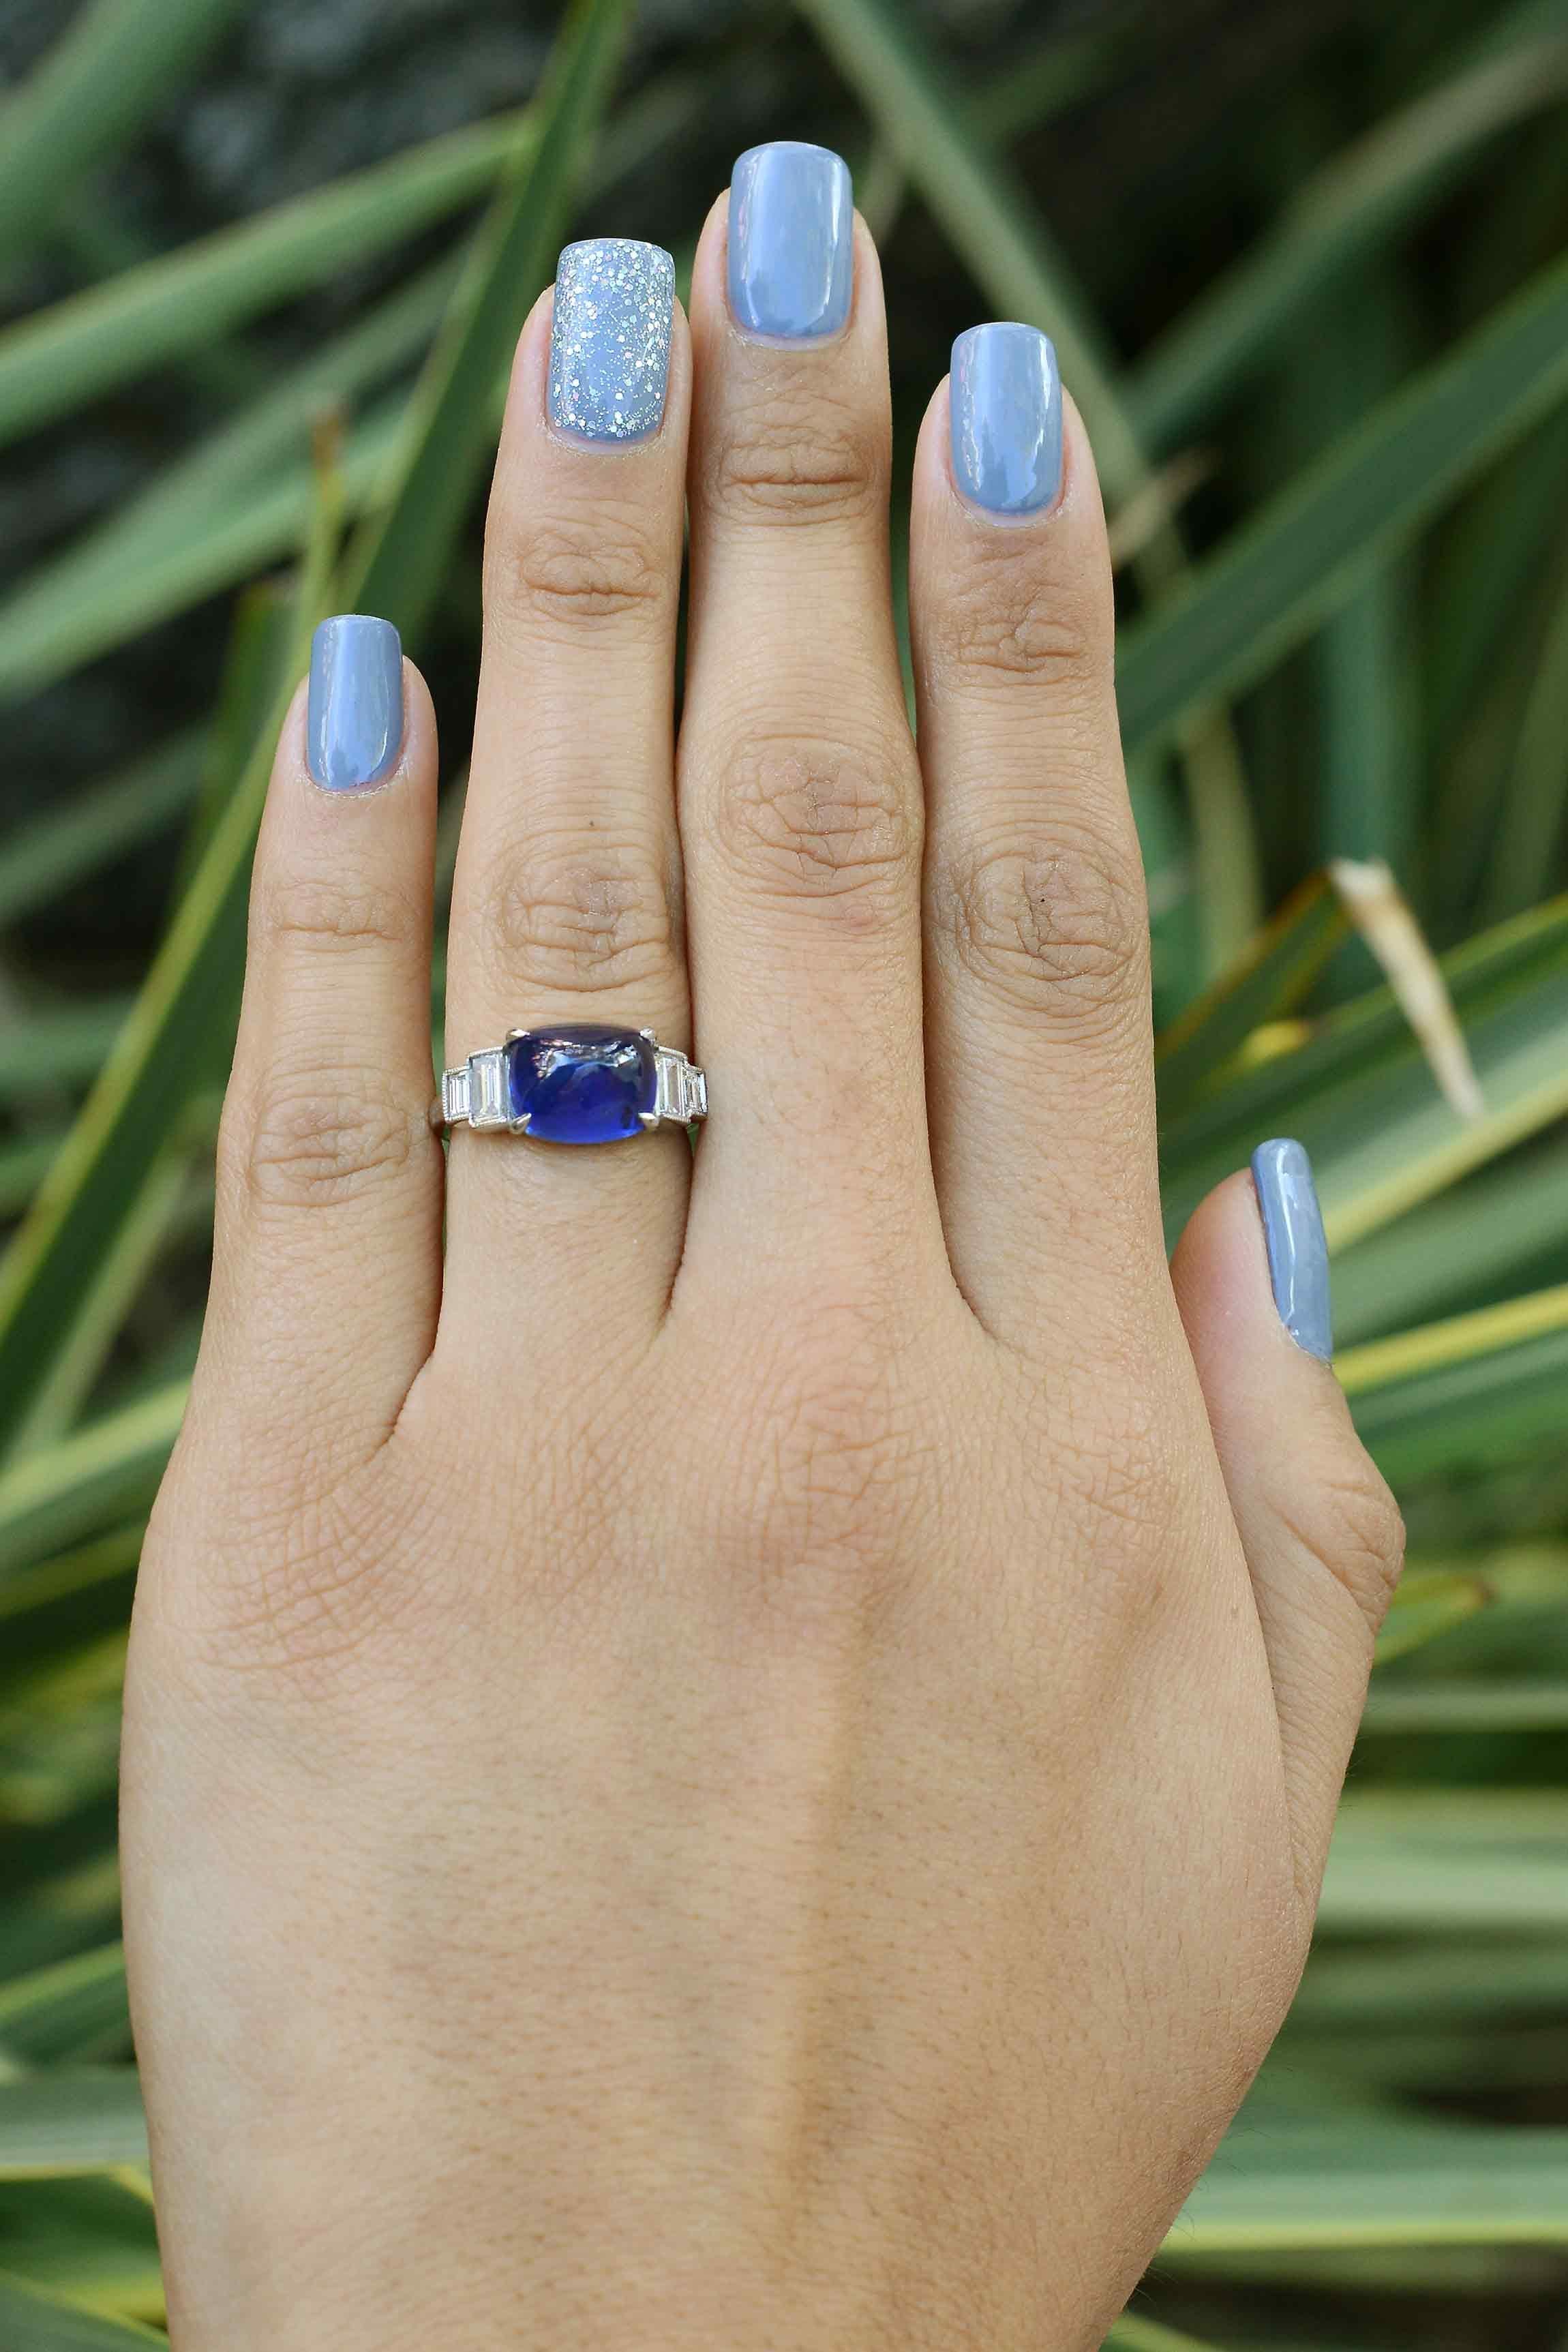 The Ojai is an authentic Art Deco sugarloaf sapphire and diamond engagement ring. Standing tall in the saddle is a 7 carat cabochon of an intensely vivid royal blue, possessing a fabulous luster and Kashmir type color. Fashioned as a dome pyramid,